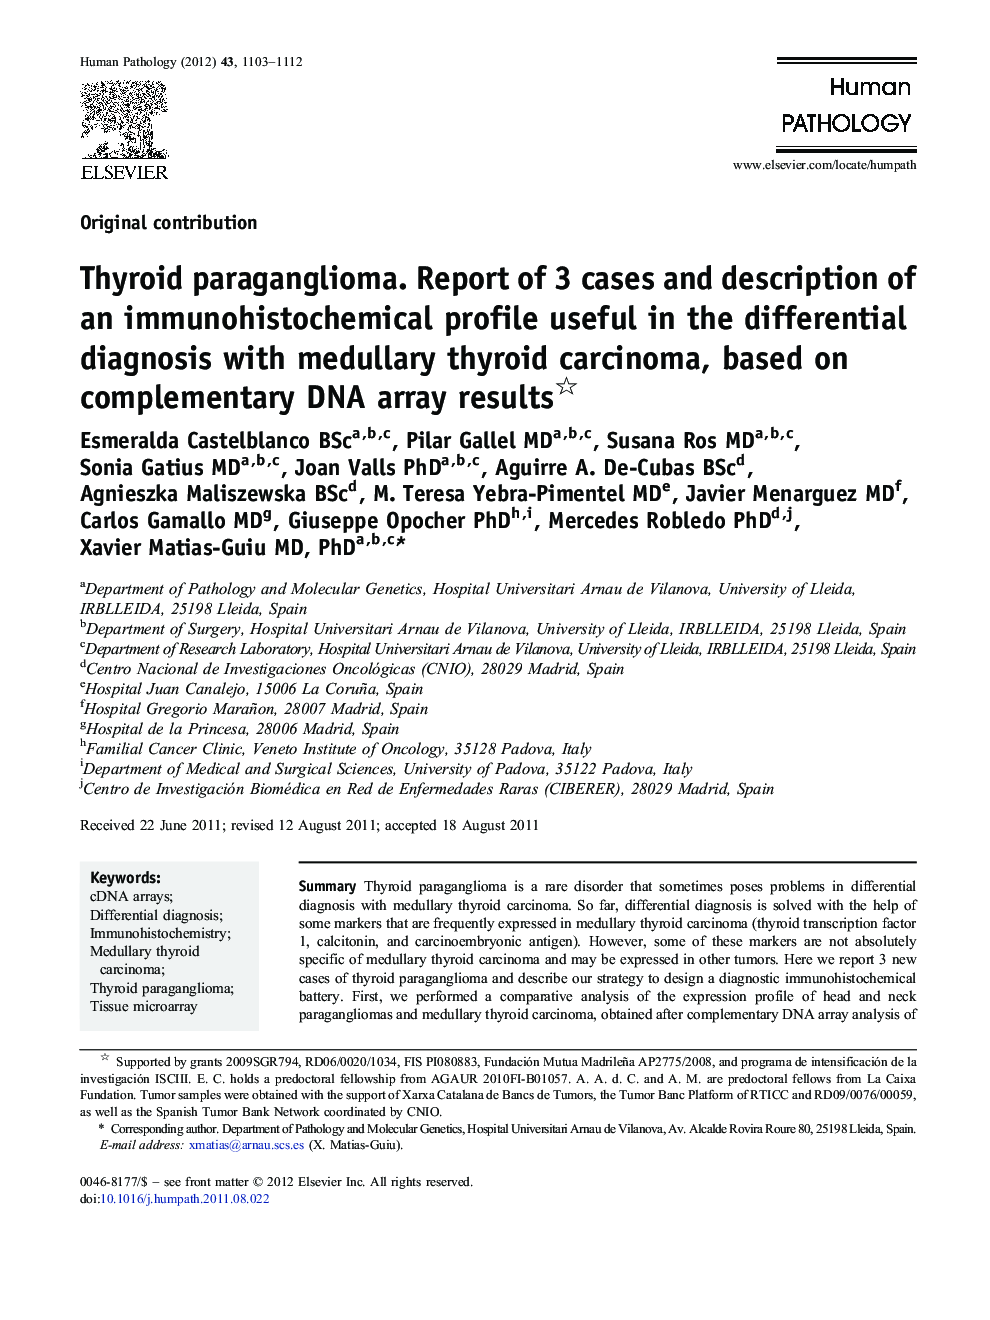 Thyroid paraganglioma. Report of 3 cases and description of an immunohistochemical profile useful in the differential diagnosis with medullary thyroid carcinoma, based on complementary DNA array results 